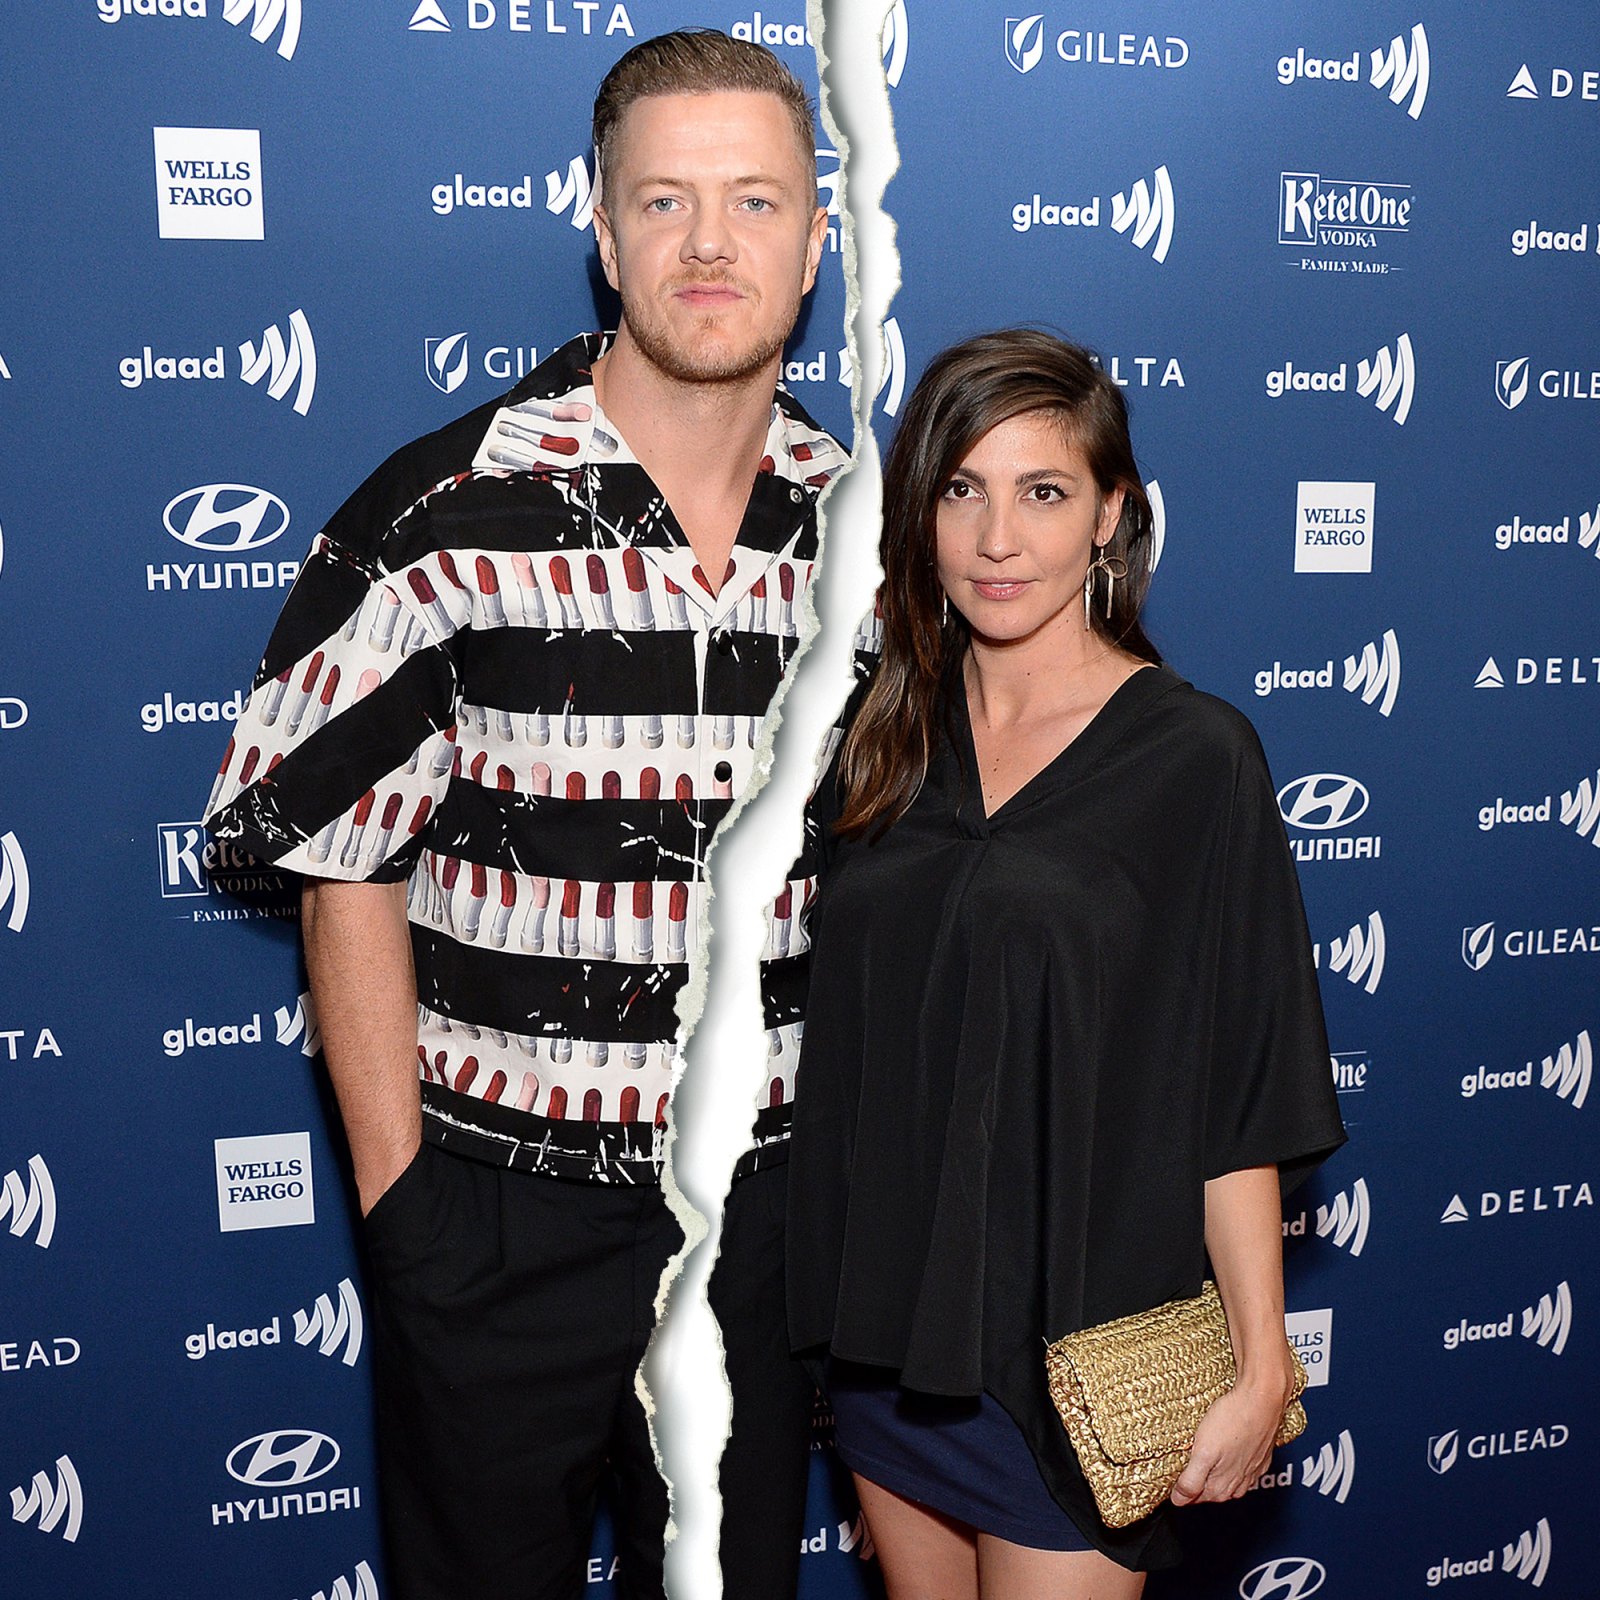 Imagine Dragons’ Dan Reynolds and Wife Aja Volkman 'Saddened' to Split After 'Many Beautiful Years Together'